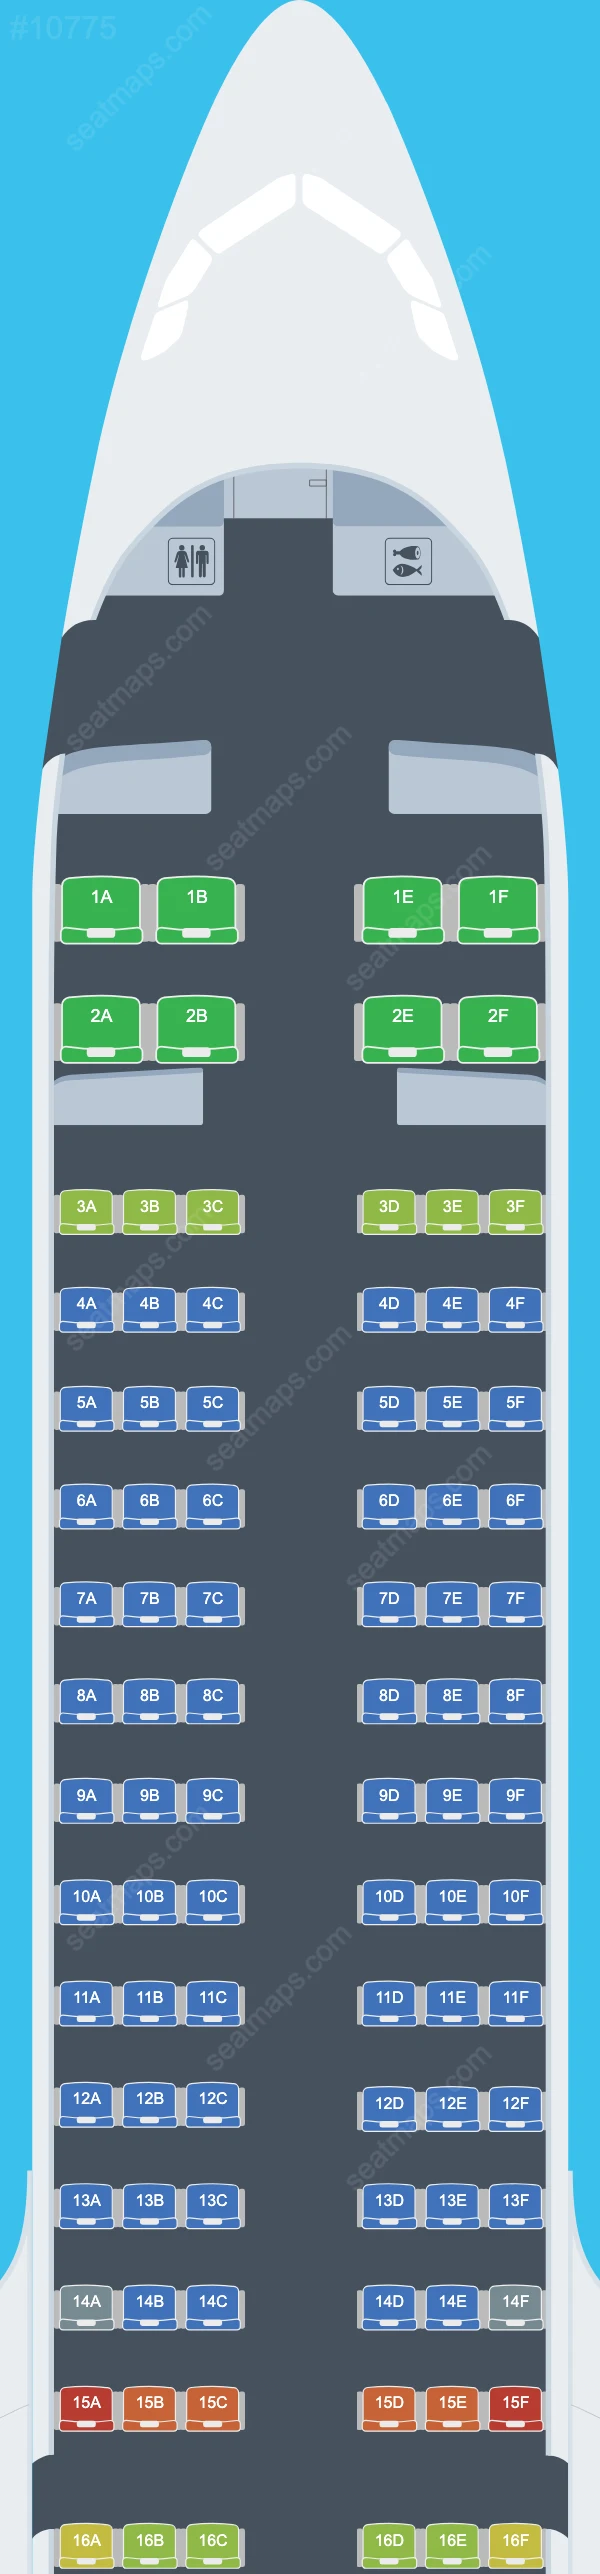 Turkish Airlines Airbus A321 Seat Maps A321-200neo NX V.2